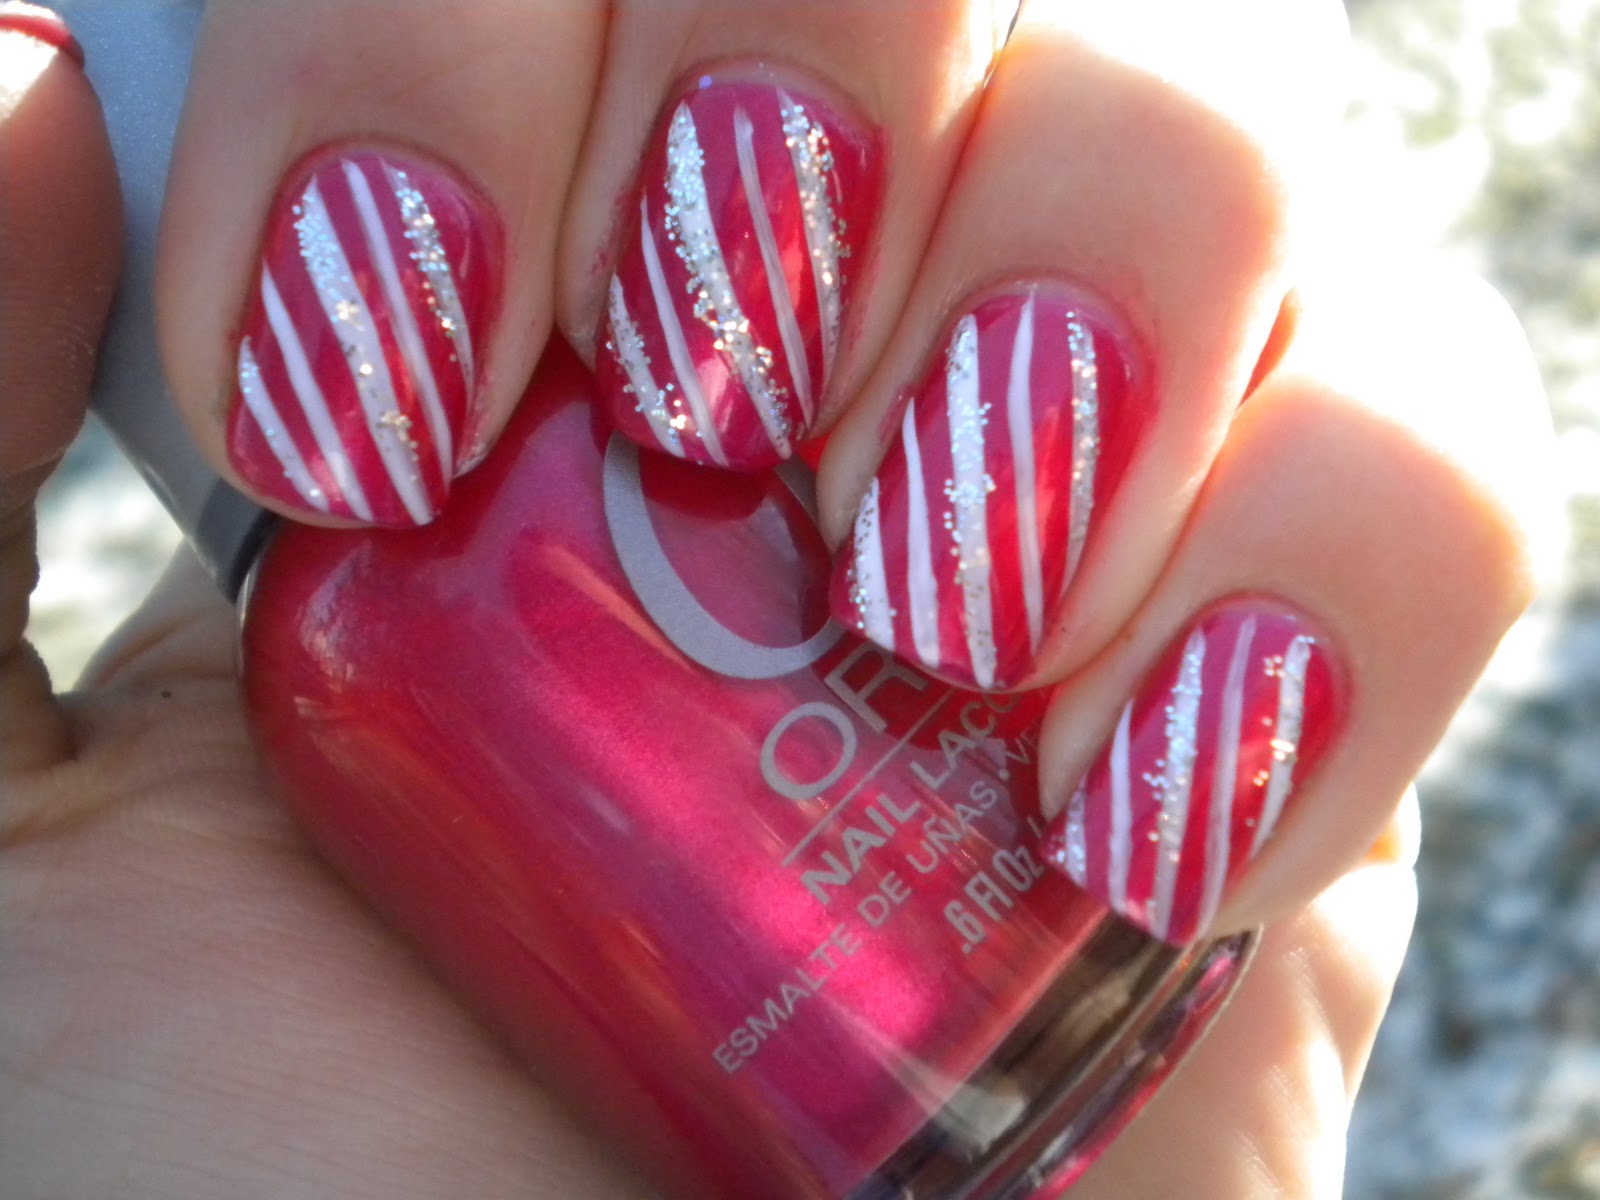 4. Sparkly Pink and White Candy Cane Nail Art Inspiration - wide 7